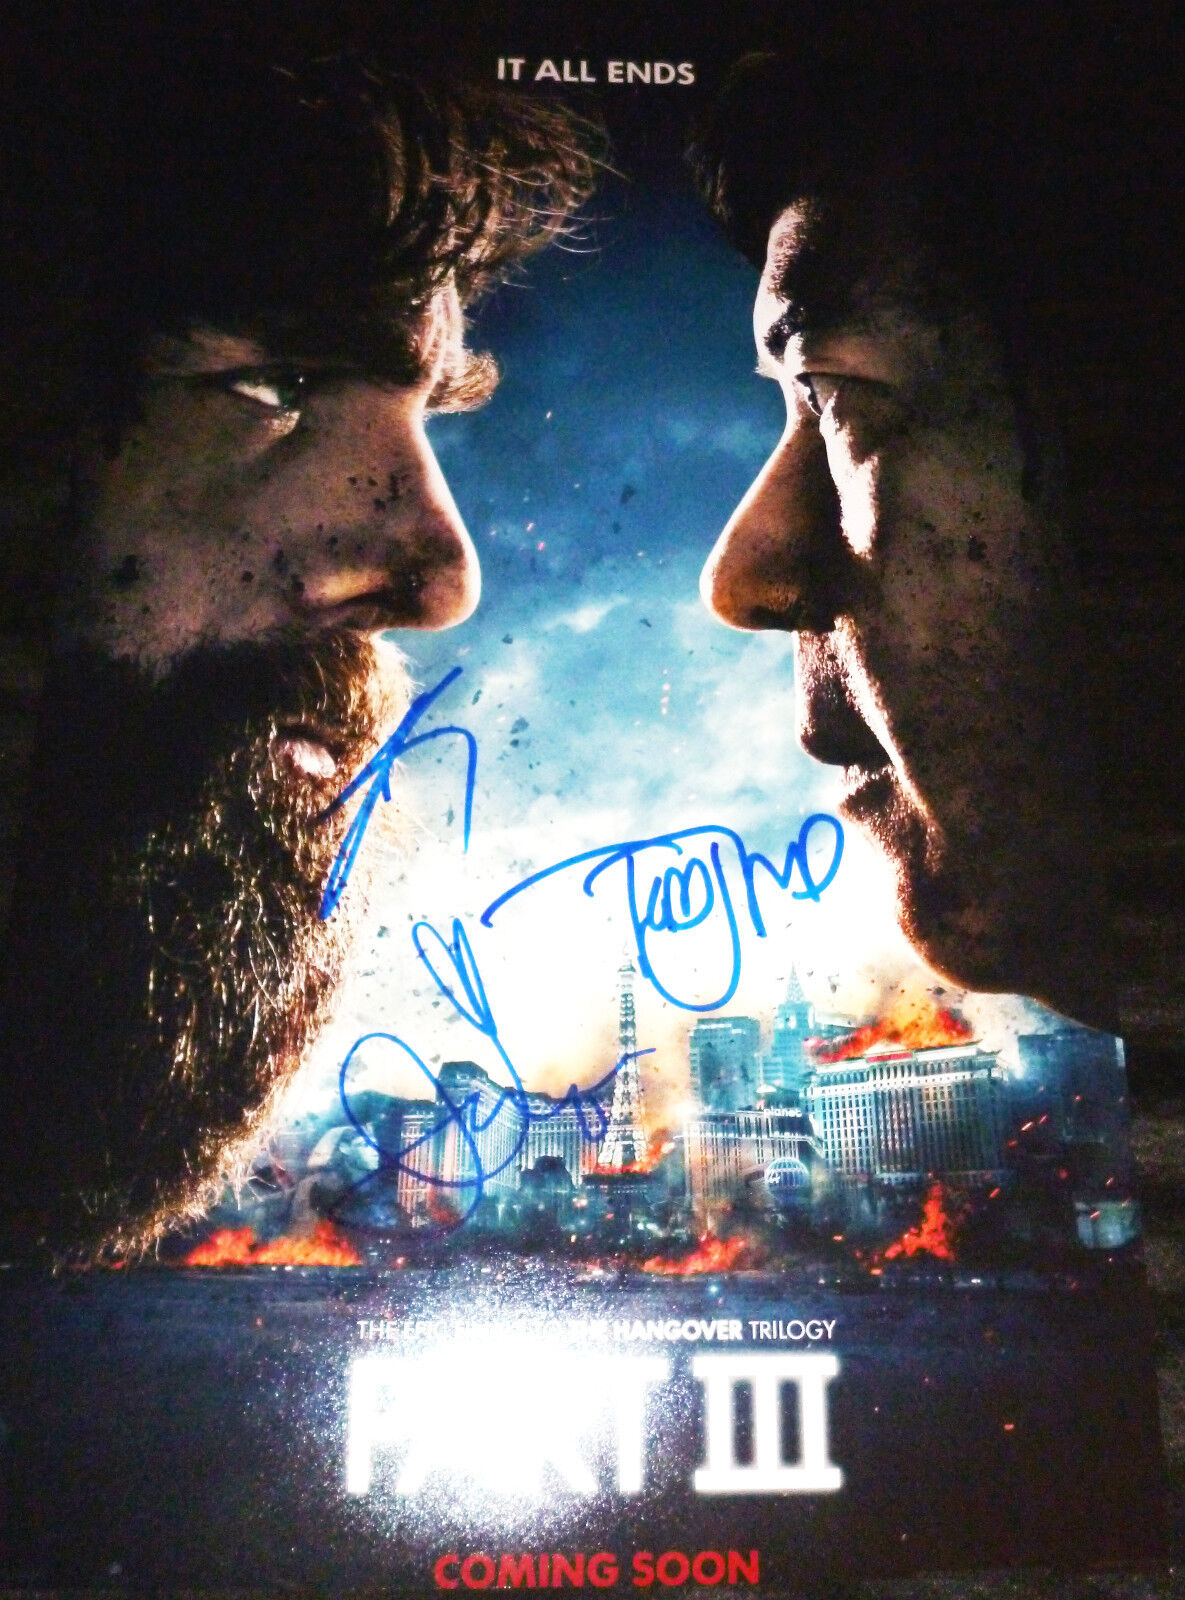 THE HANGOVER 3 (x3) Hand-Signed 11x17 Photo Poster painting (Todd Phillips-Justin Bartha)(PROOF)